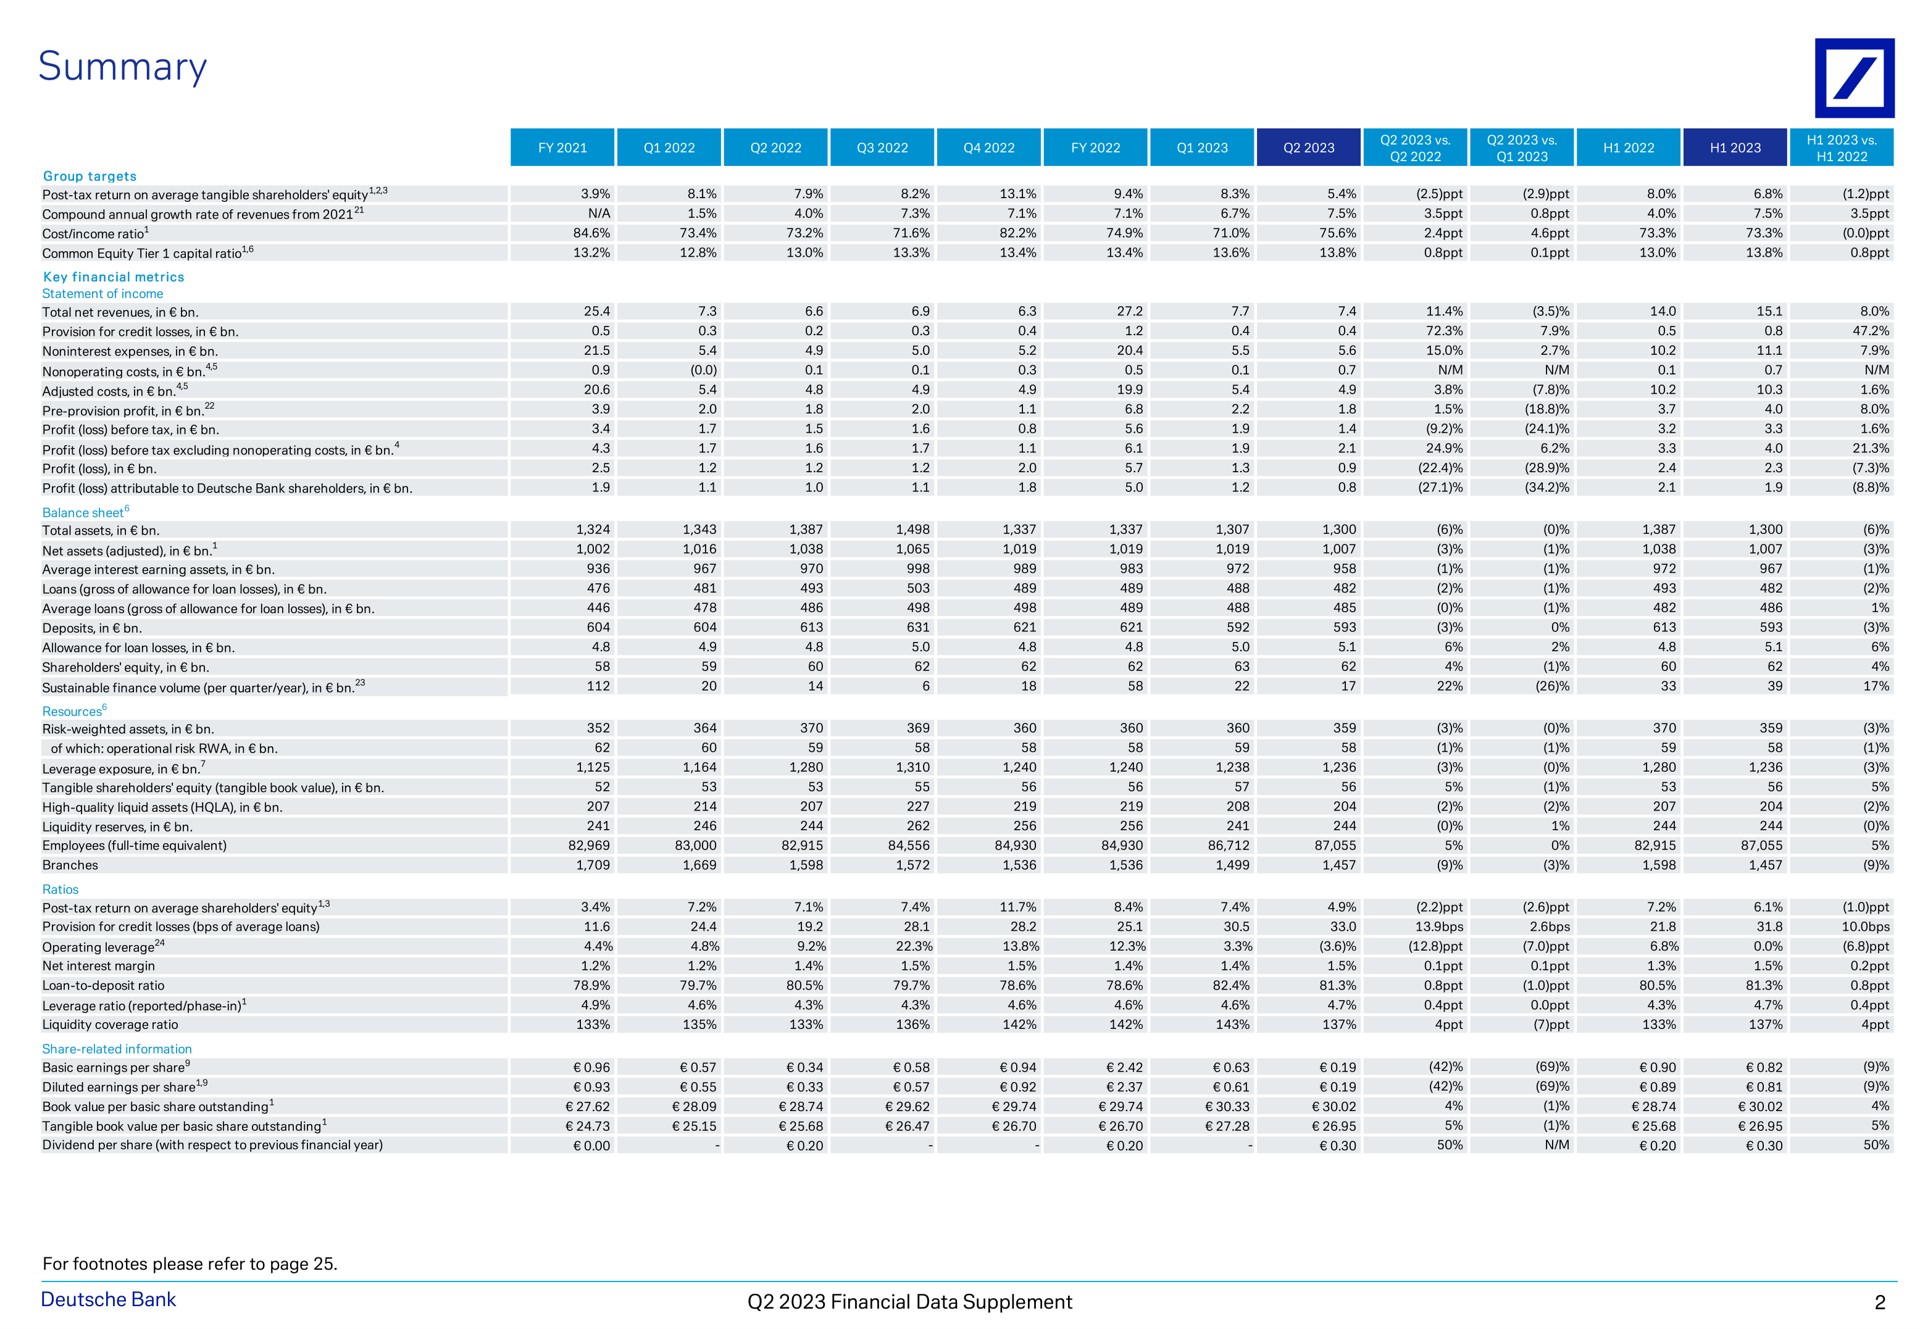 summary adjusted costs in a a a bank financial data supplement | Deutsche Bank